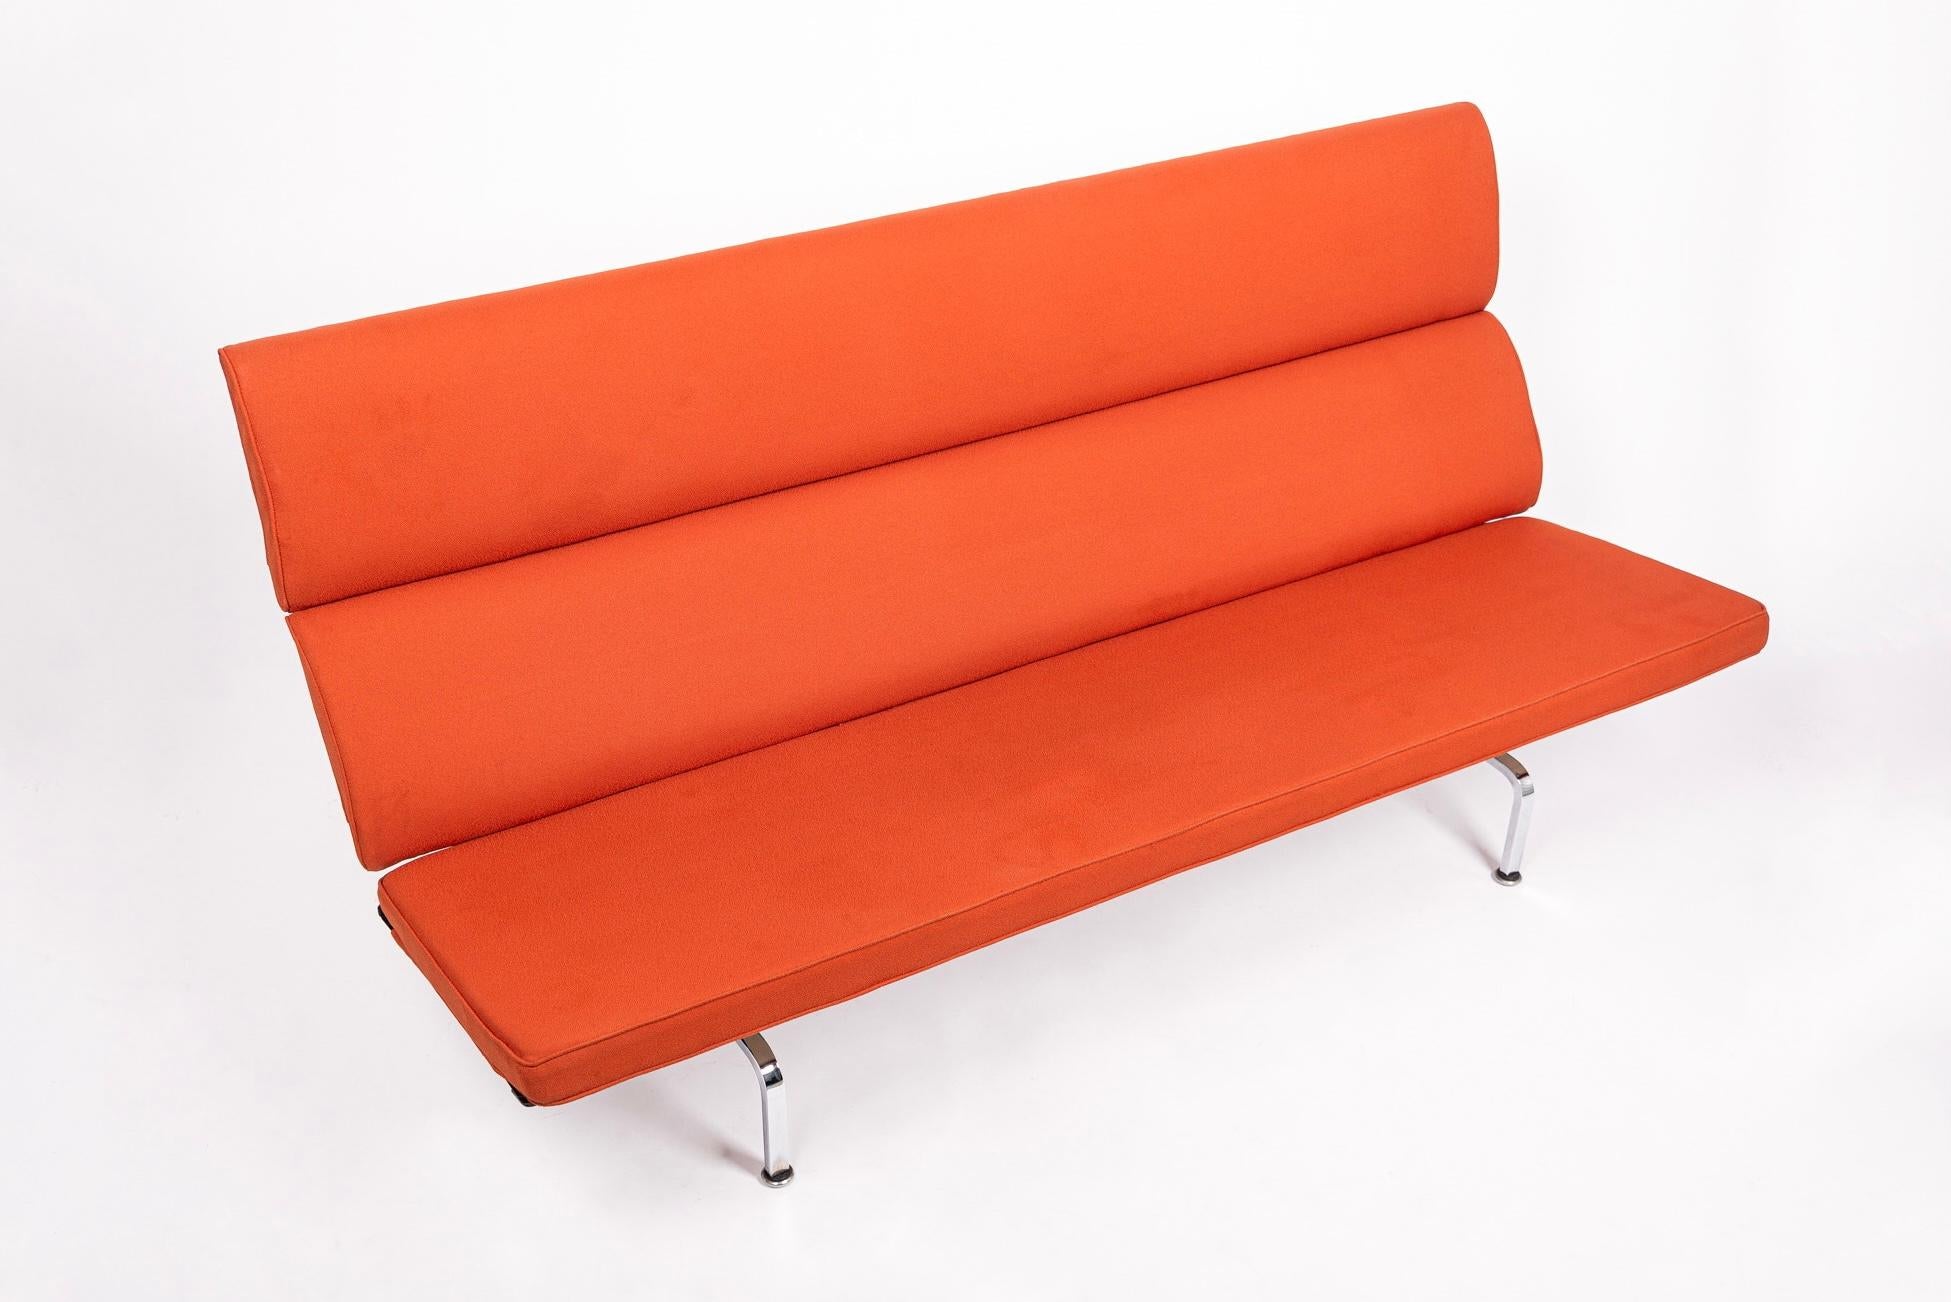 American 1970s Midcentury Orange Sofa Compact by Charles & Ray Eames for Herman Miller